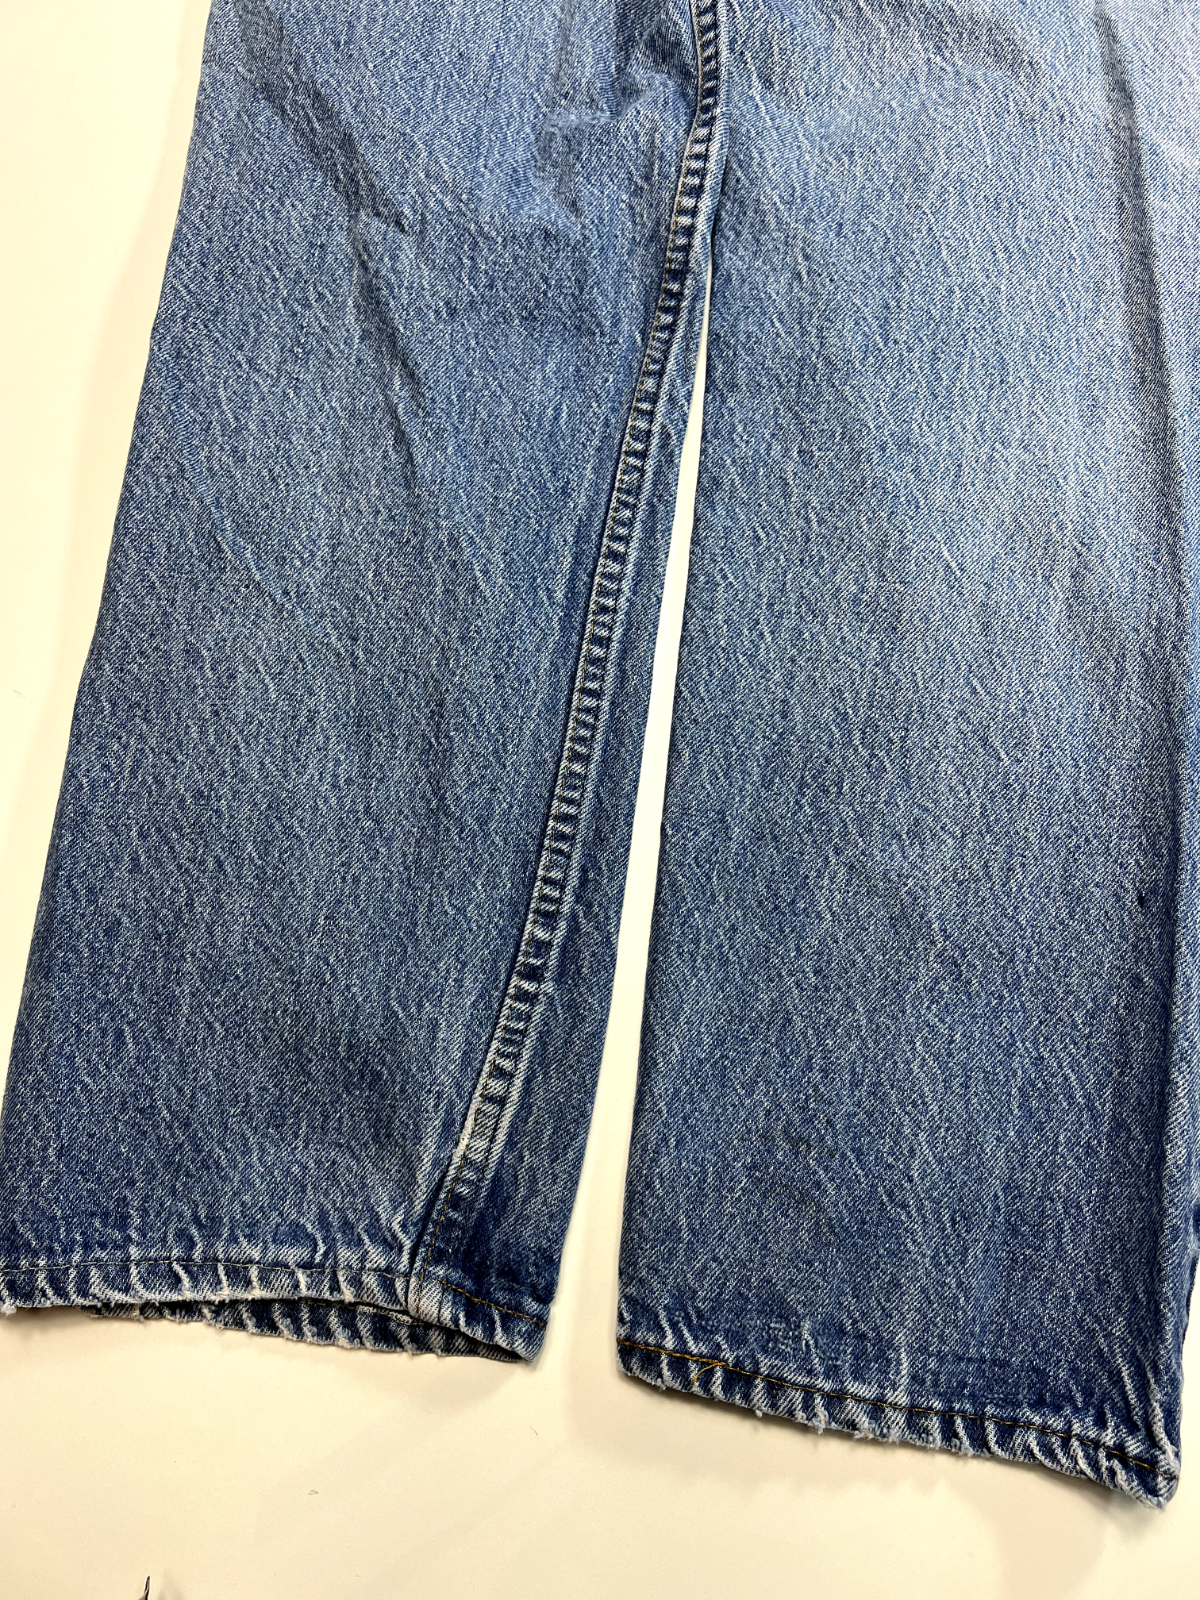 Vintage 80s/90s Levi's Orange Tab Light Wash Distressed Relaxed Fit Pants Sz 33W